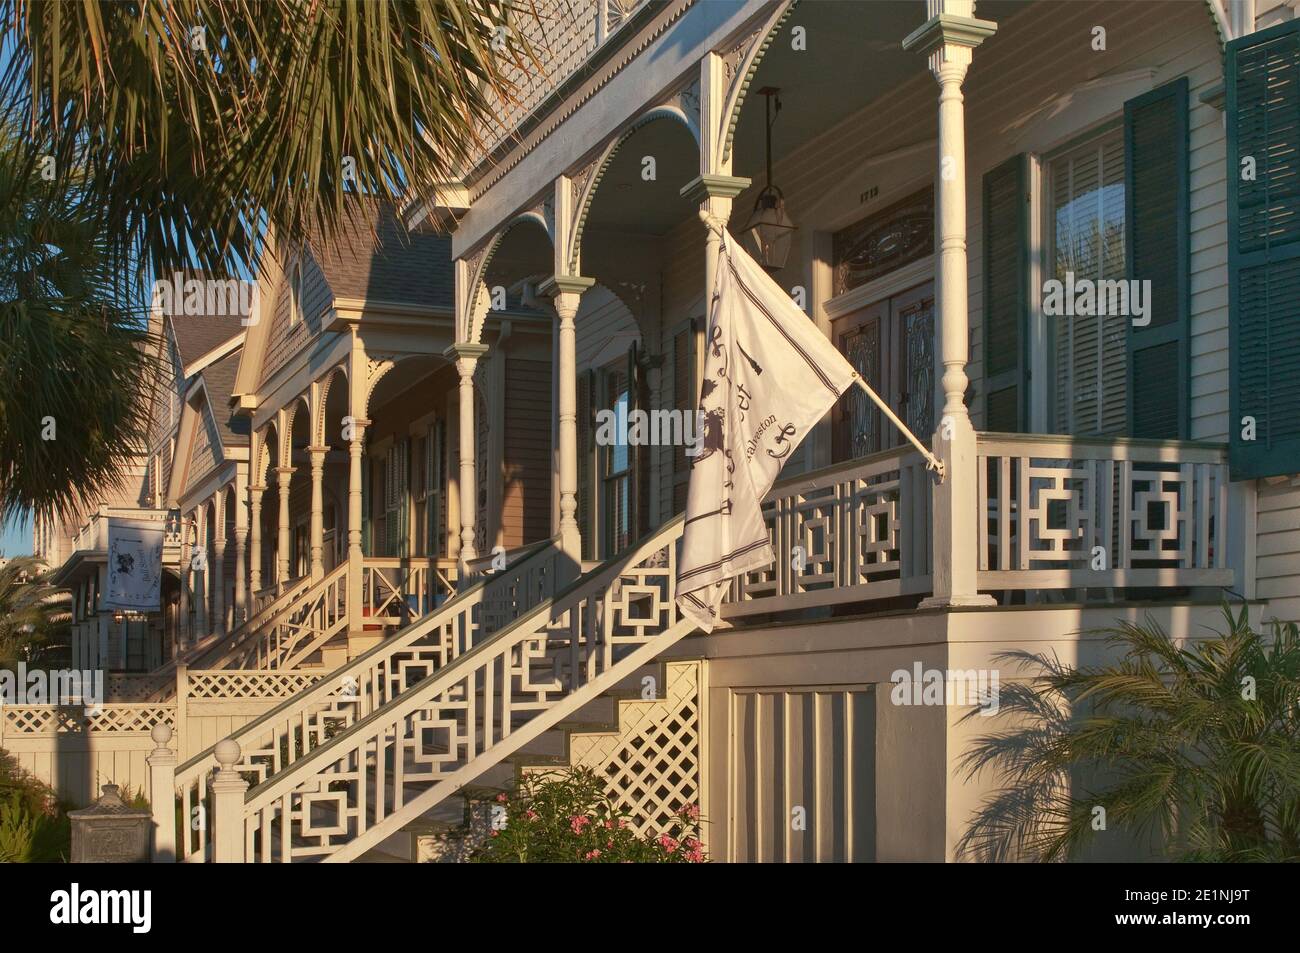 Porches of 'gingerbread' houses, Victorian style, at Ball Avenue in East End Historic District, sunset, Galveston, Texas, USA Stock Photo